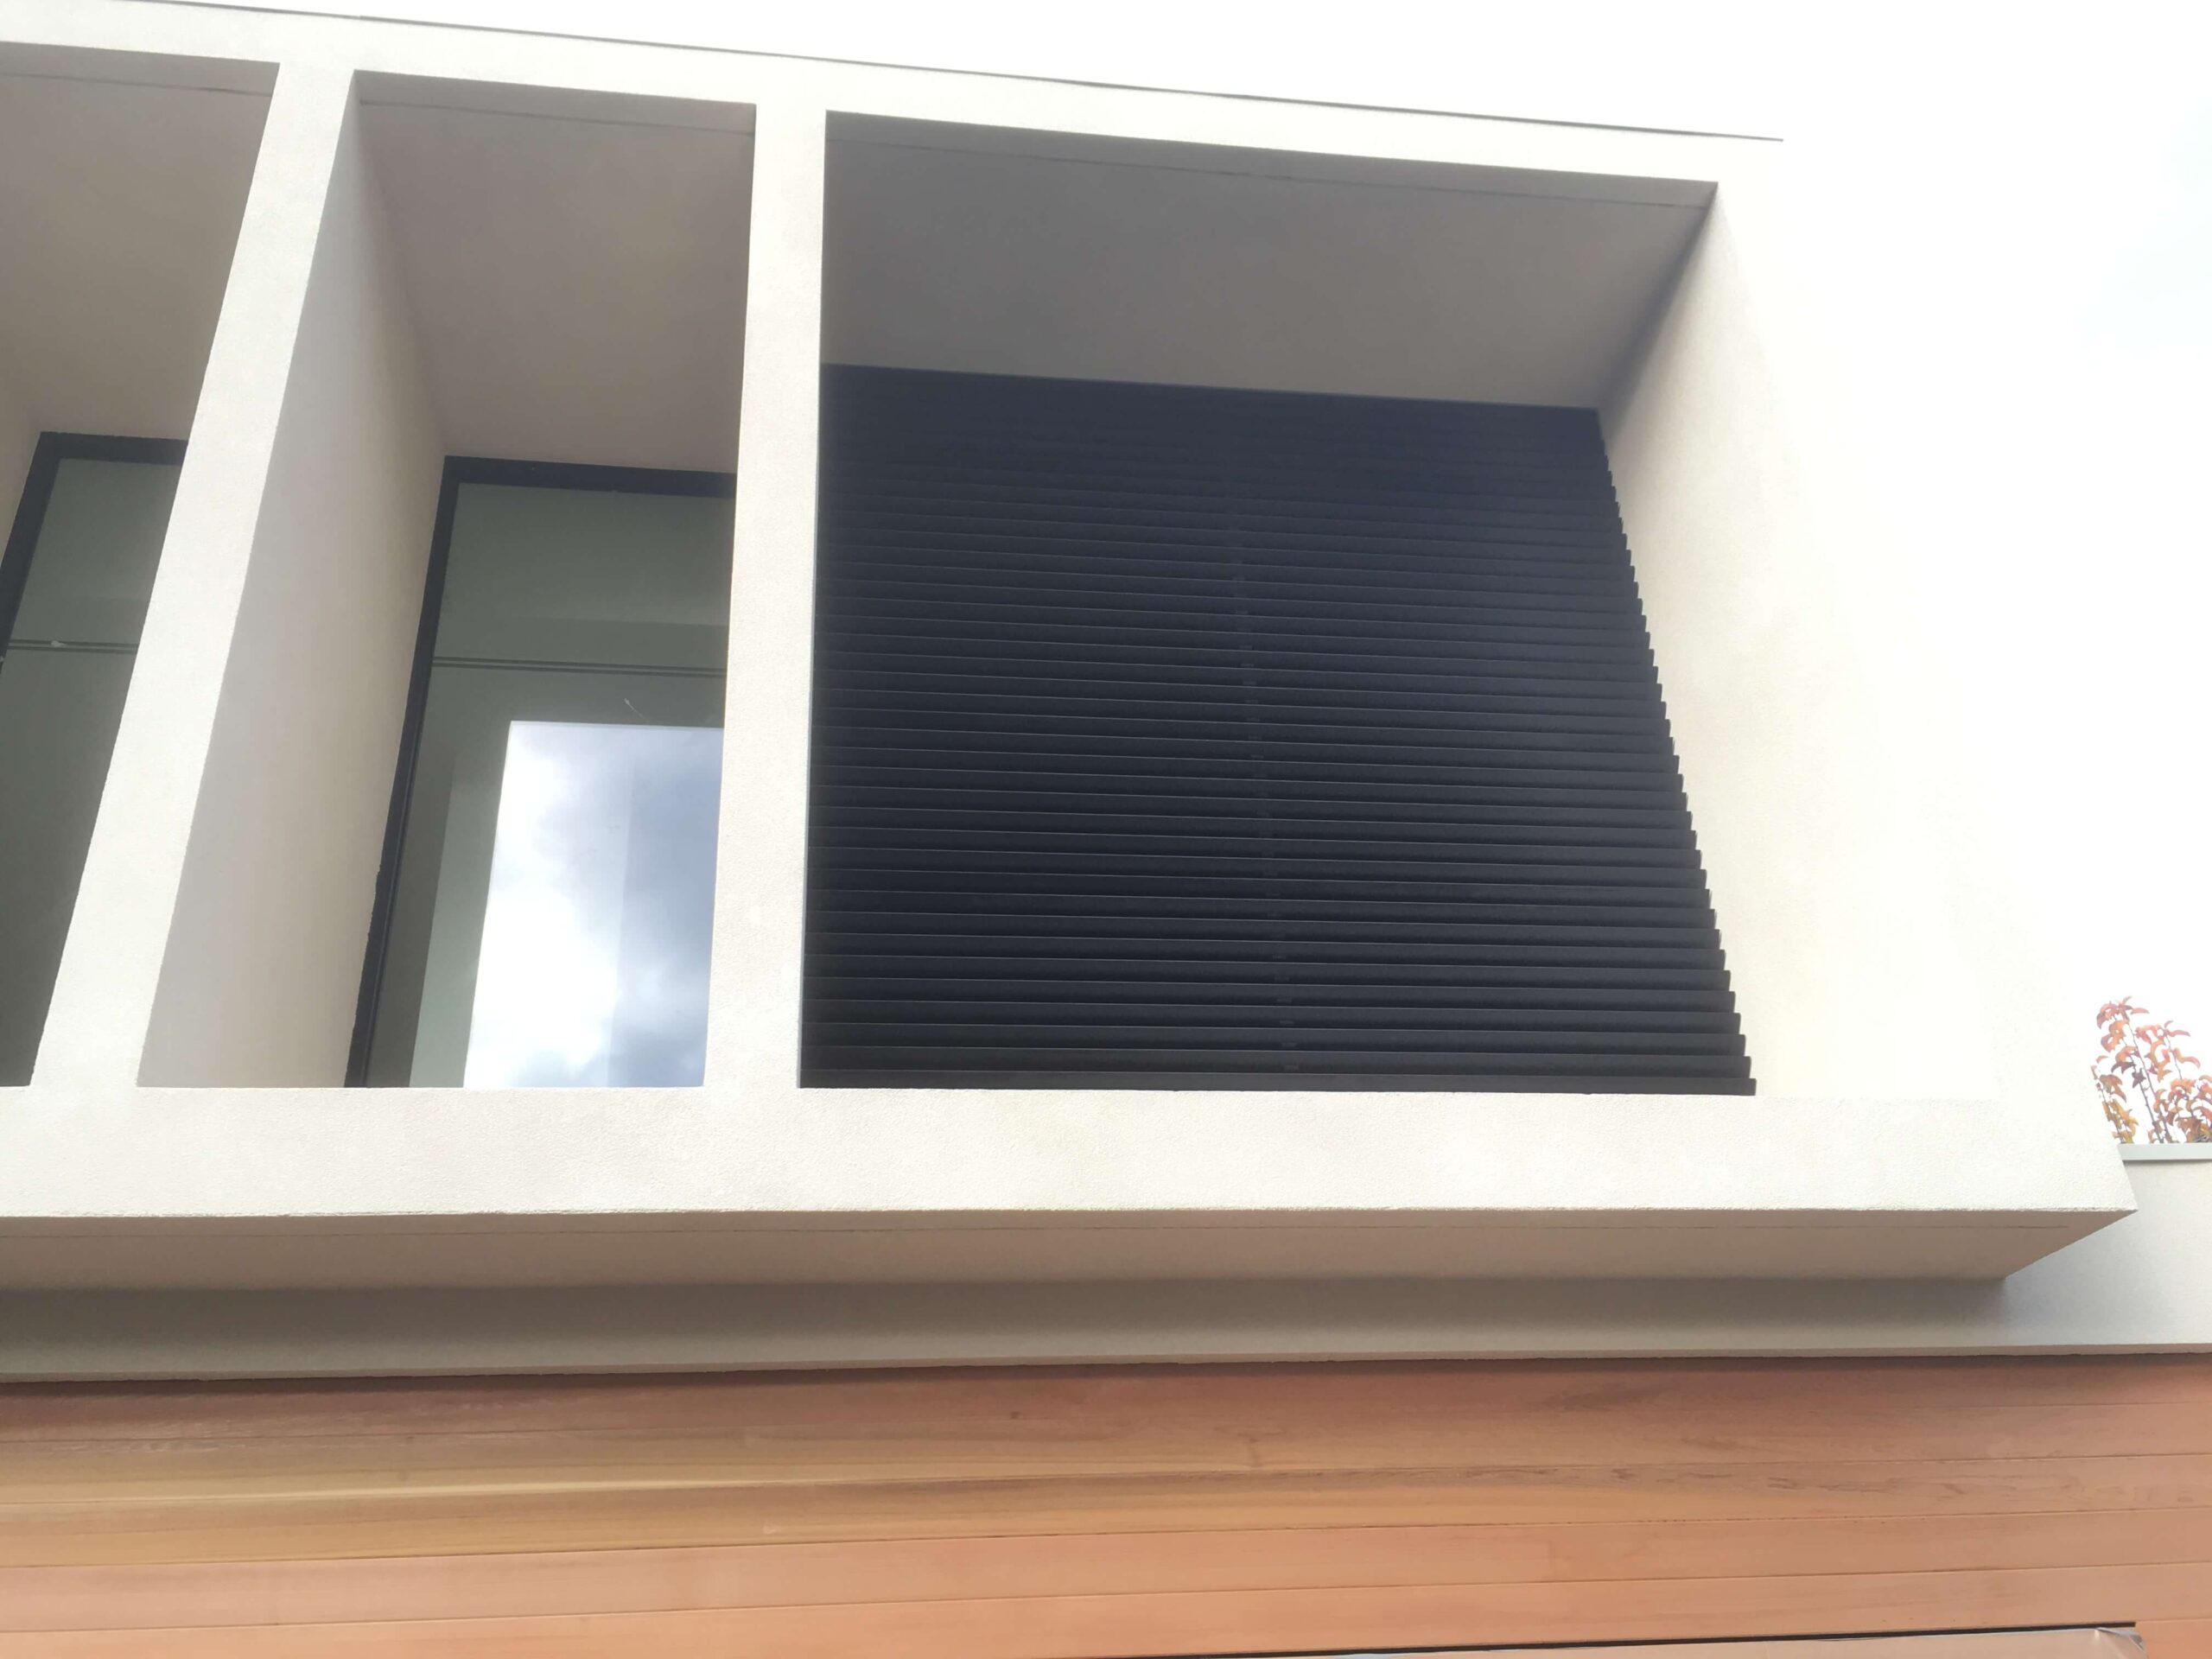 Window Louvre installation services Melbourne - Boswen gates and fences